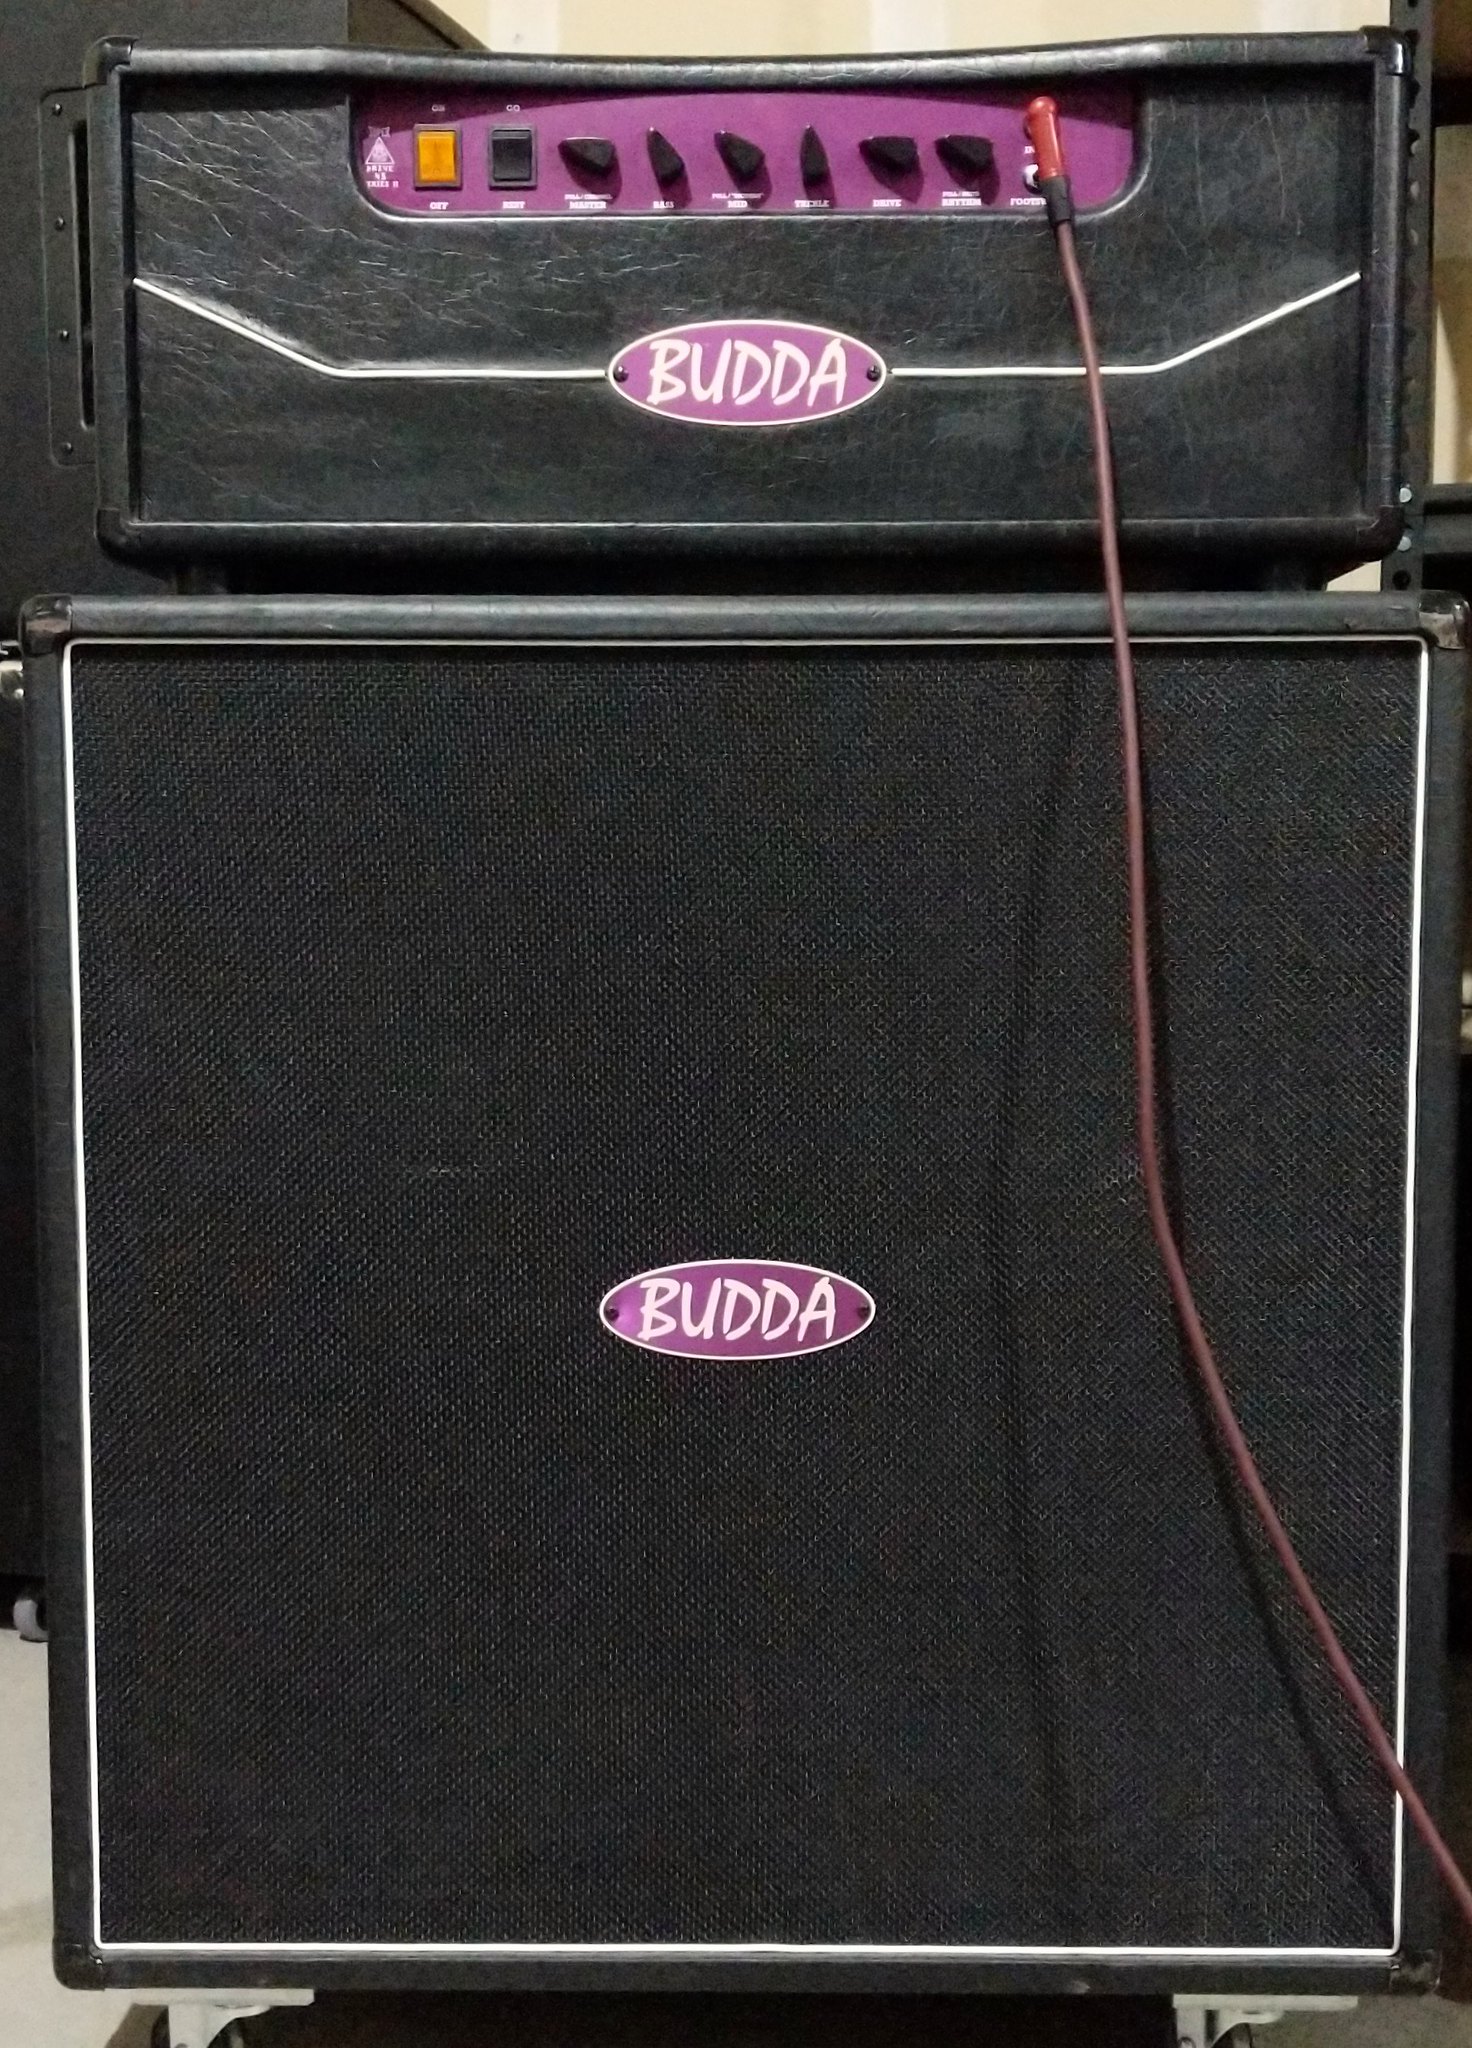 Guitar Gear Forum • View topic - Wow! The Budda Superdrive is